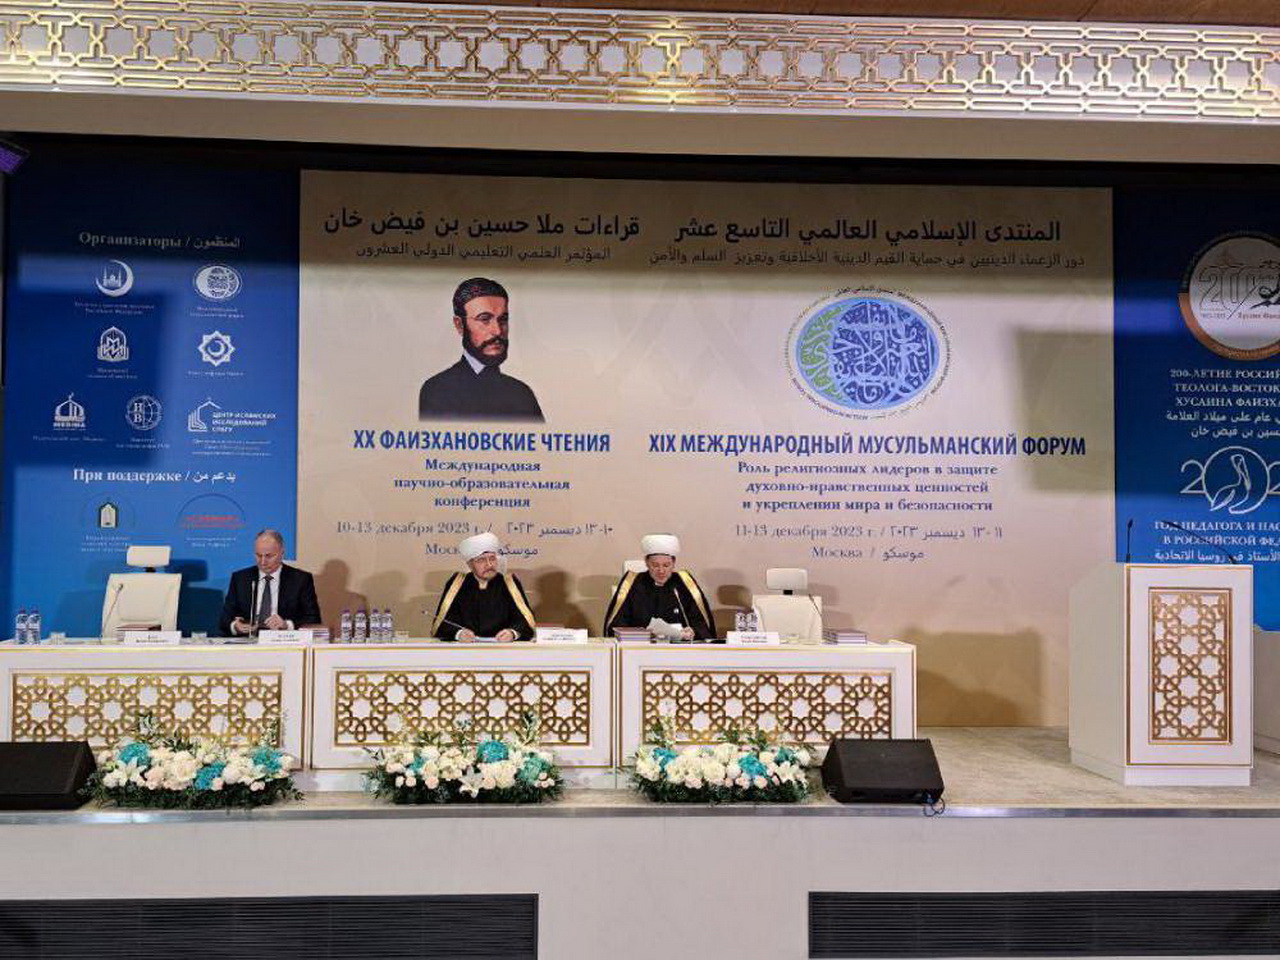 CAIS Researchers took part in the International Academic and Educational Conference “20th Faizkhanov Readings”